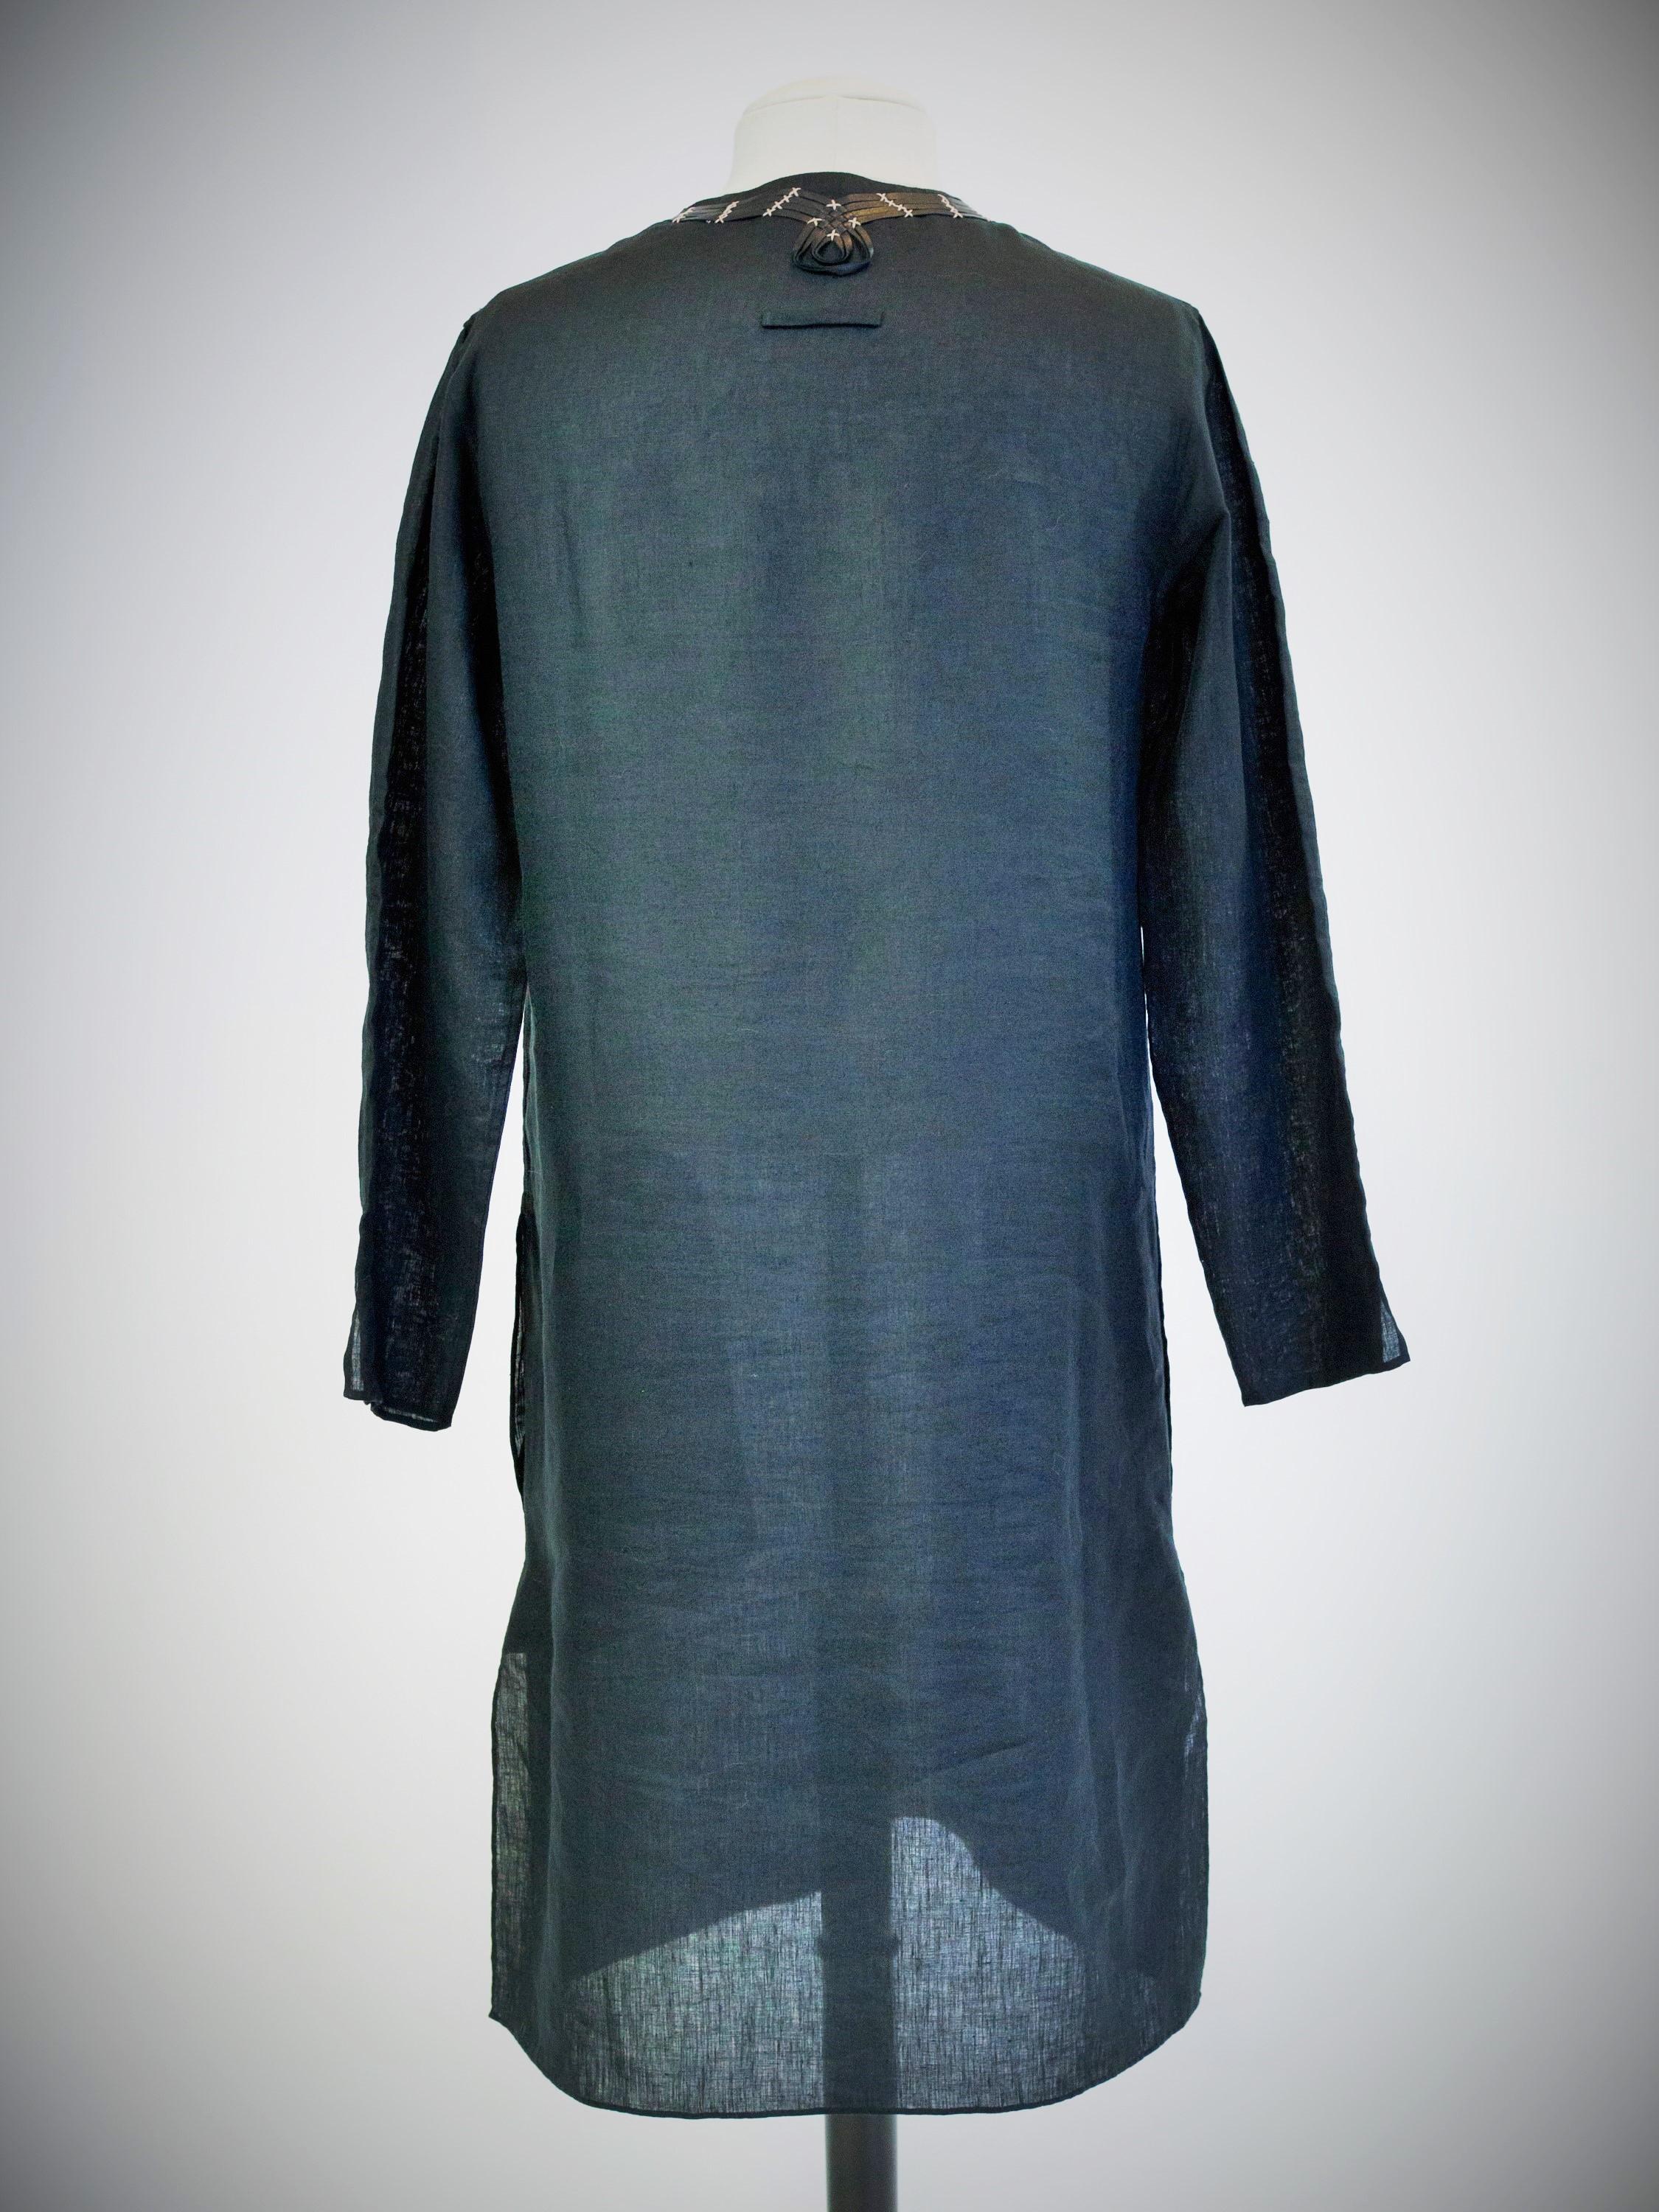 A Djellaba blouse by Jean-Paul Gaultier in embroidered black linen Circa 2000 For Sale 2